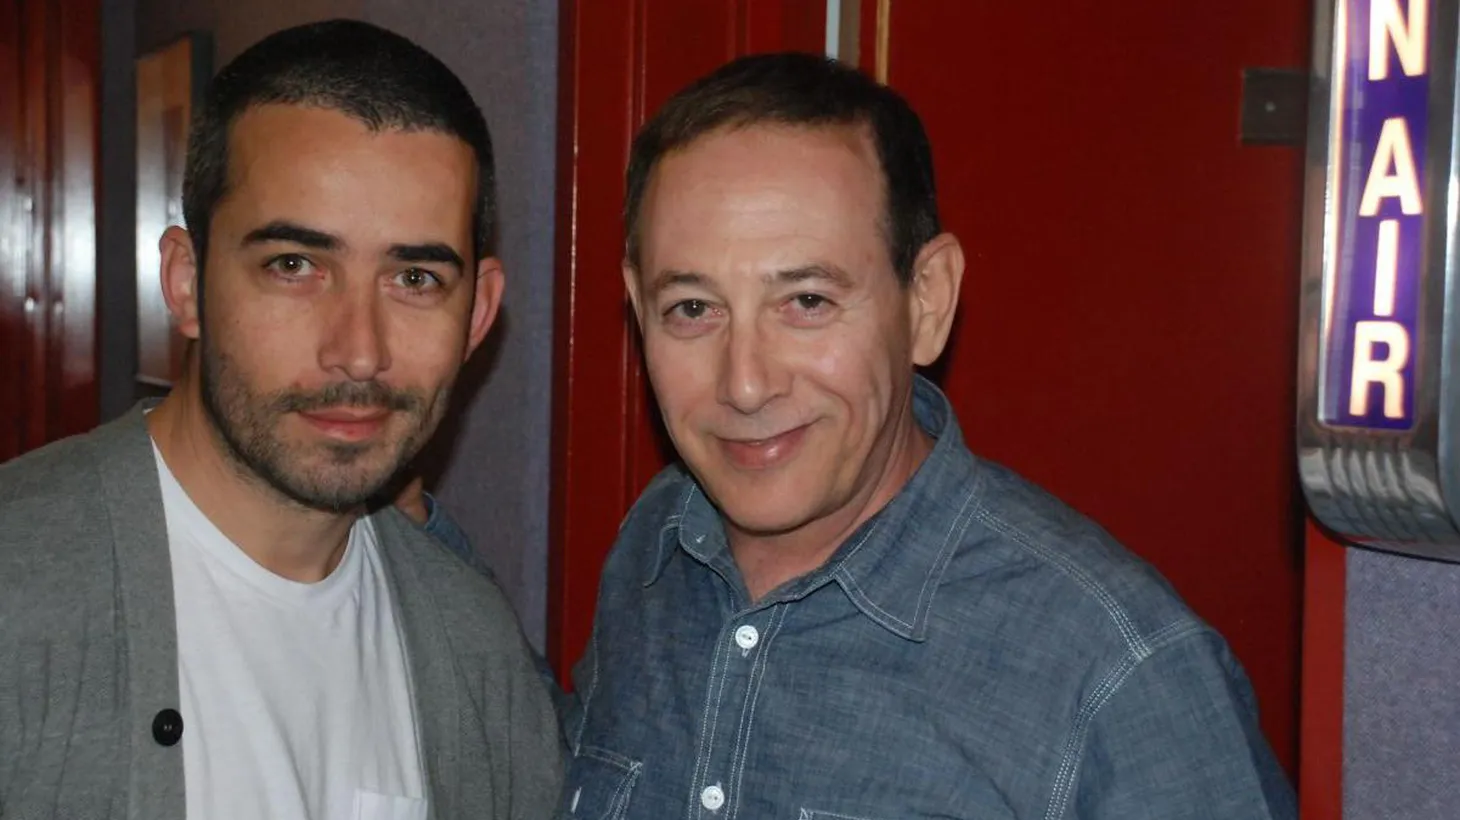 Actor Paul Reubens will be hitting Broadway soon as his classic character Pee-Wee Herman and his Guest DJ set is a celebration of songs that make him feel inspired and energized -- from the Michael Jackson track he used to pump up the comedy troupe The Groundlings before performances to the Jimi Hendrix song that made him feel “like anything was possible.” He’ll be bringing Pee-Wee’s Playhouse to the Stephen Sondheim Theatre in New York City from October 26 to January 2.